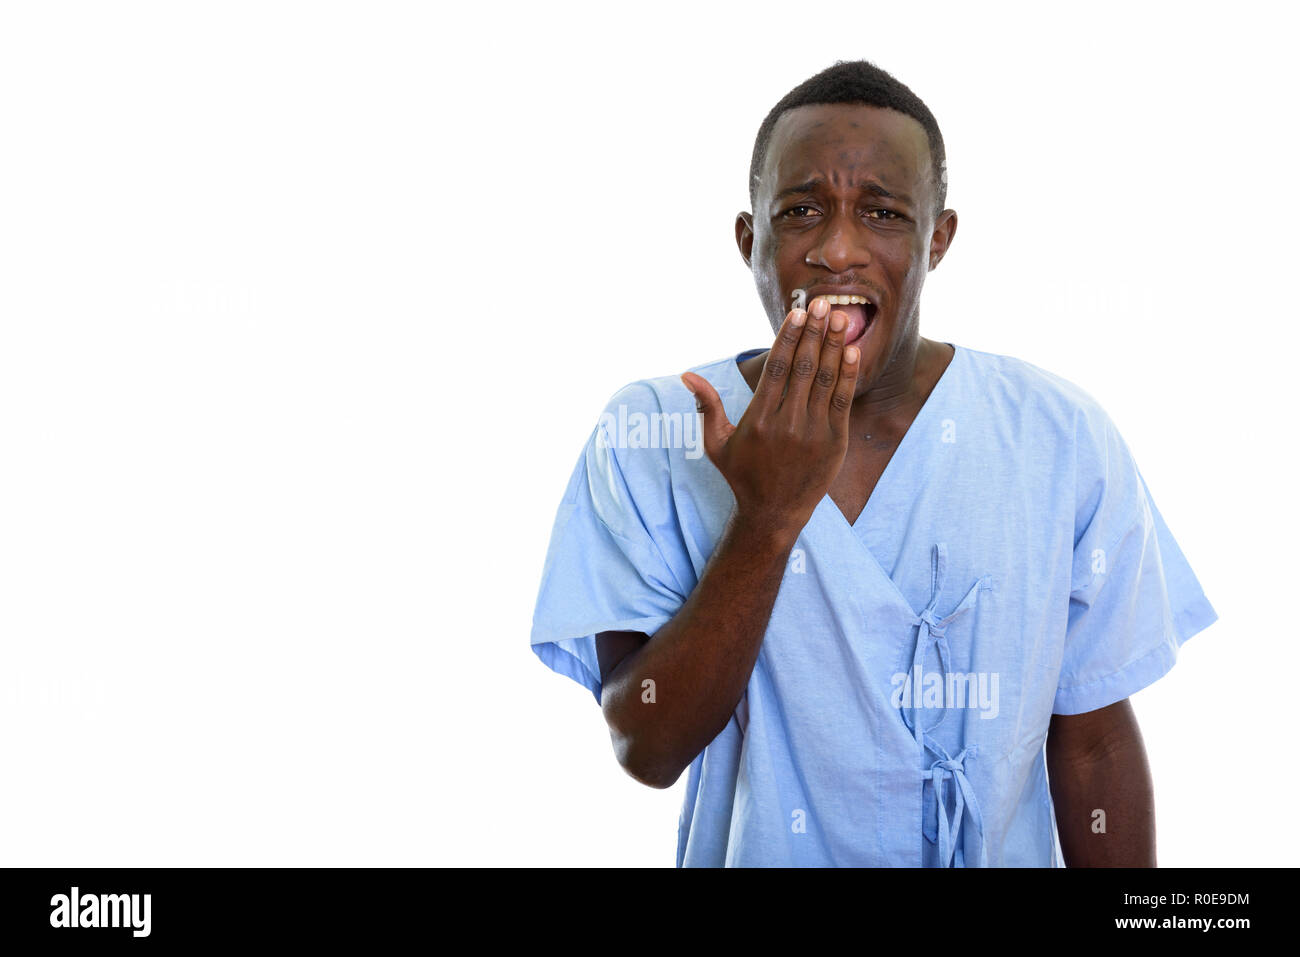 Studio shot of young happy black African man patient smiling and Stock Photo